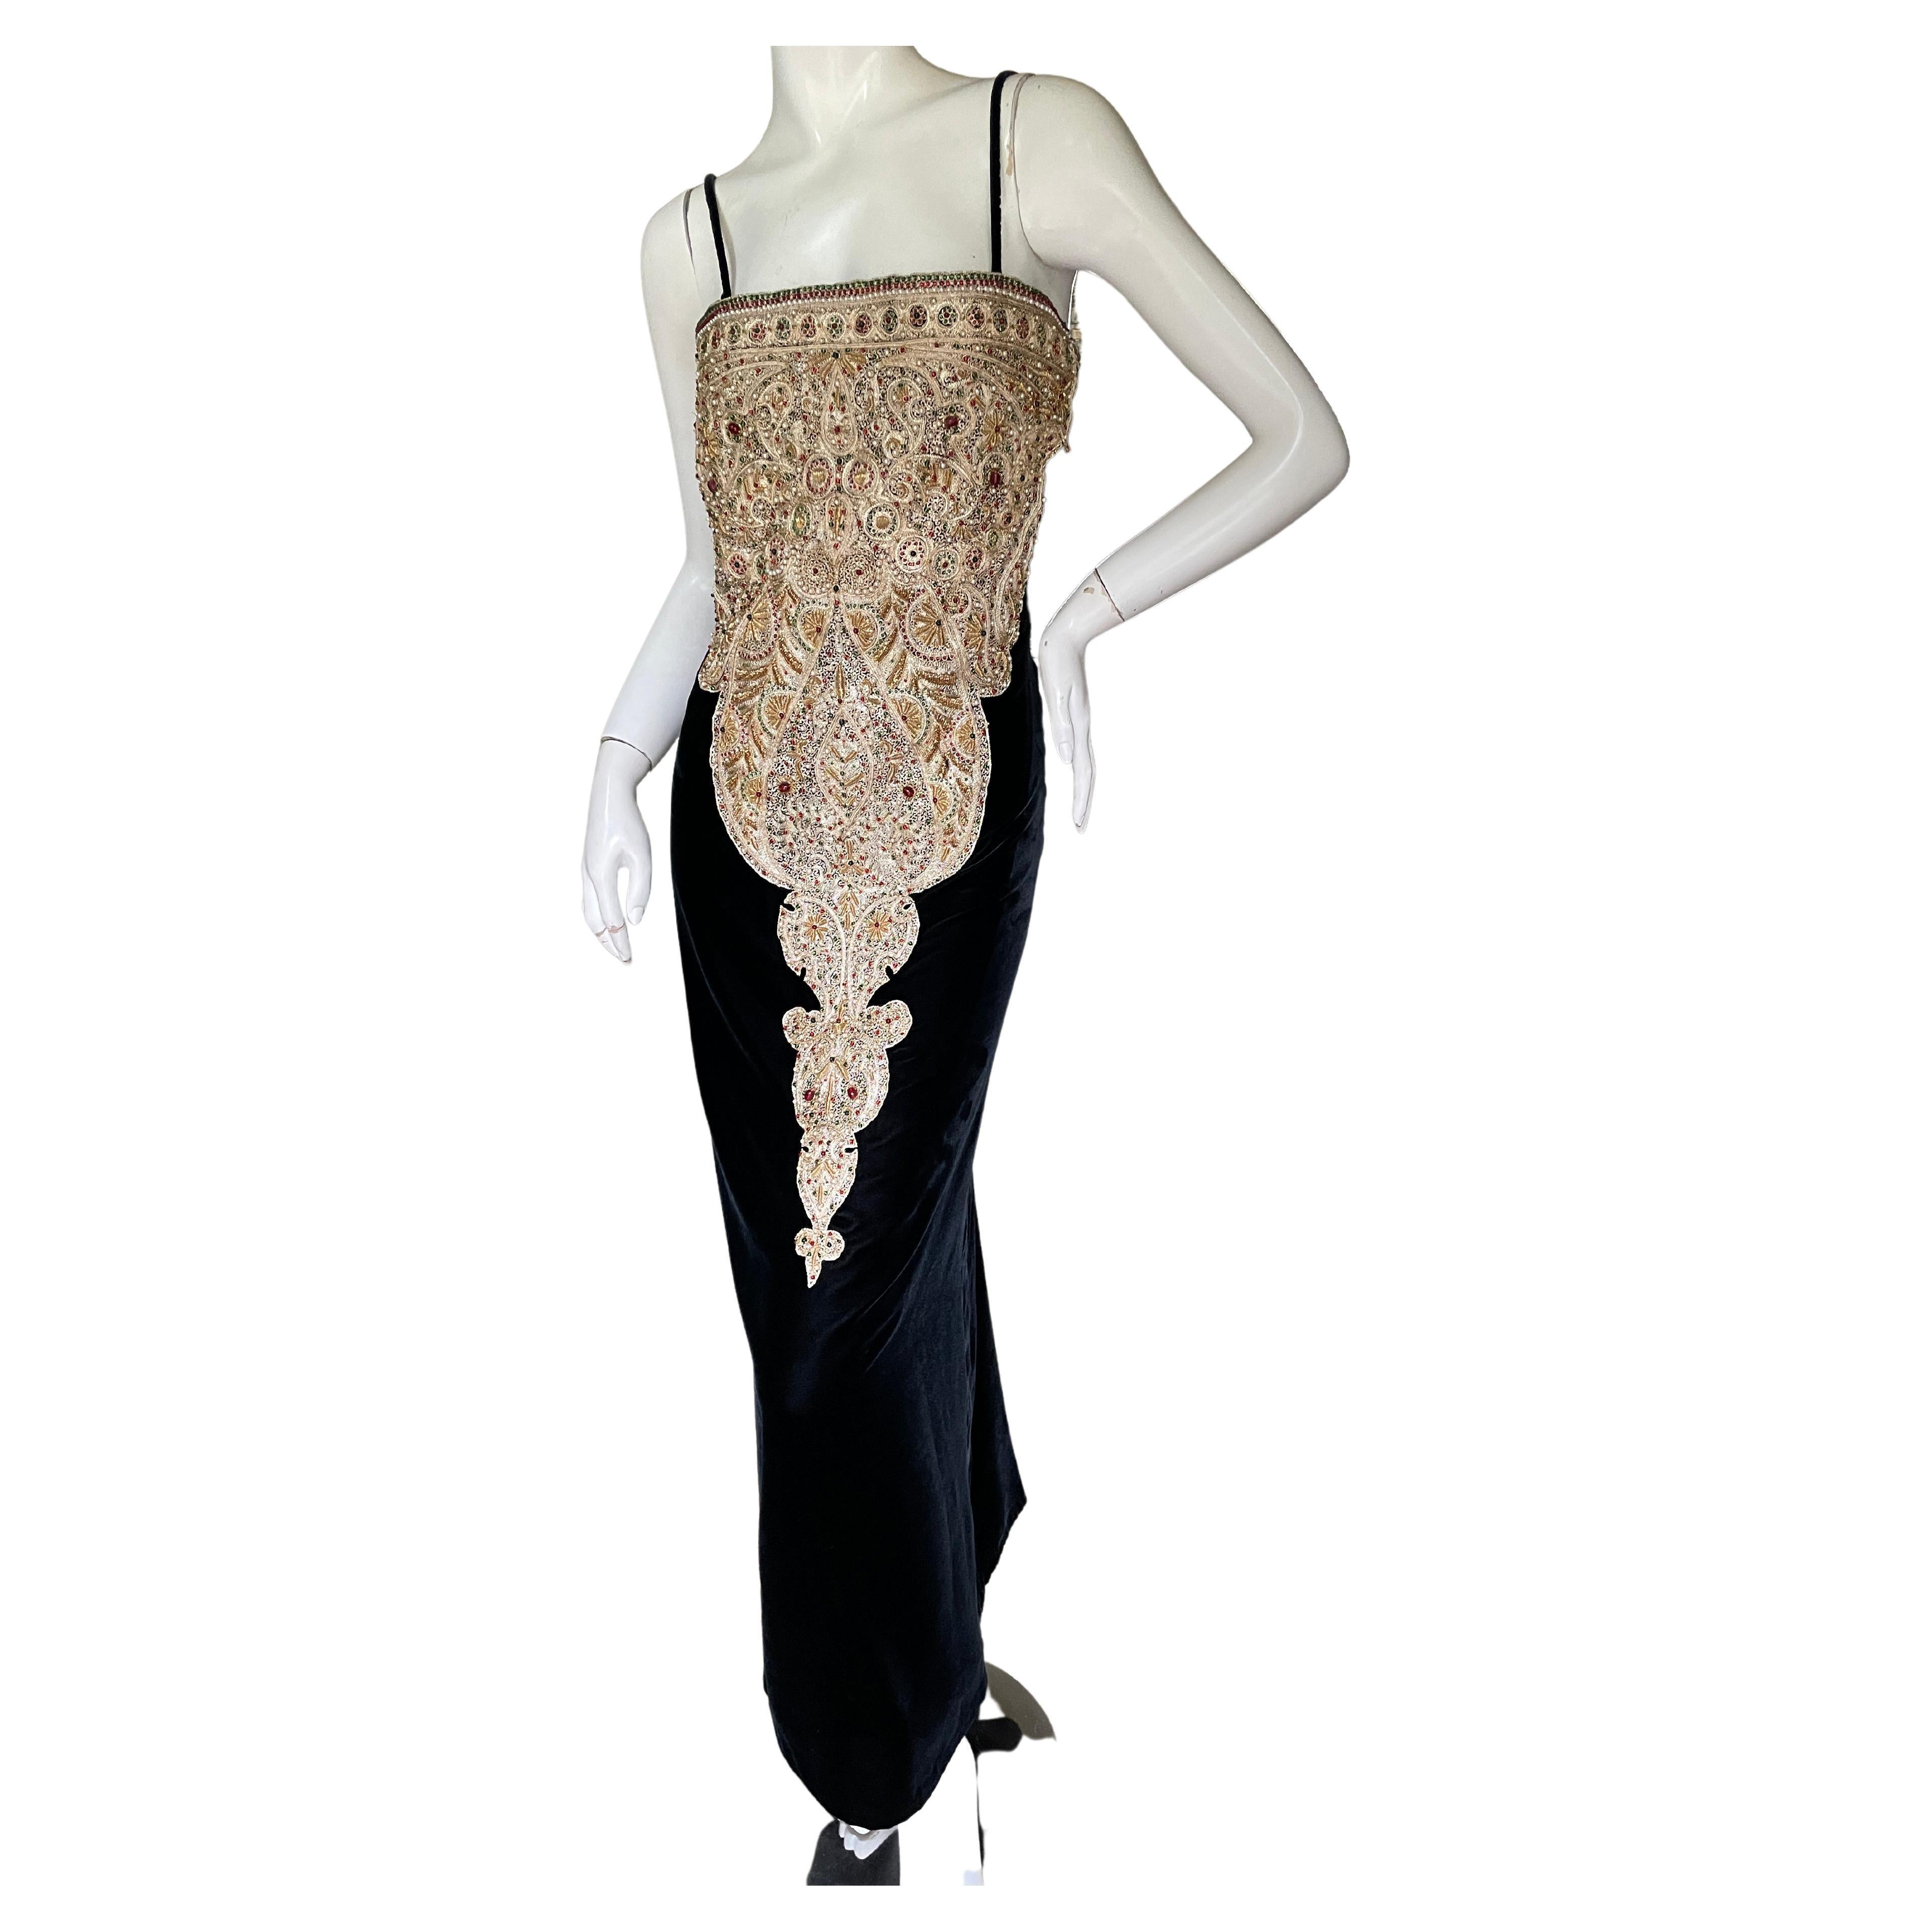 Bill Blass 1980's Black Velvet Dress with Gold and Jewel Embellishments  For Sale